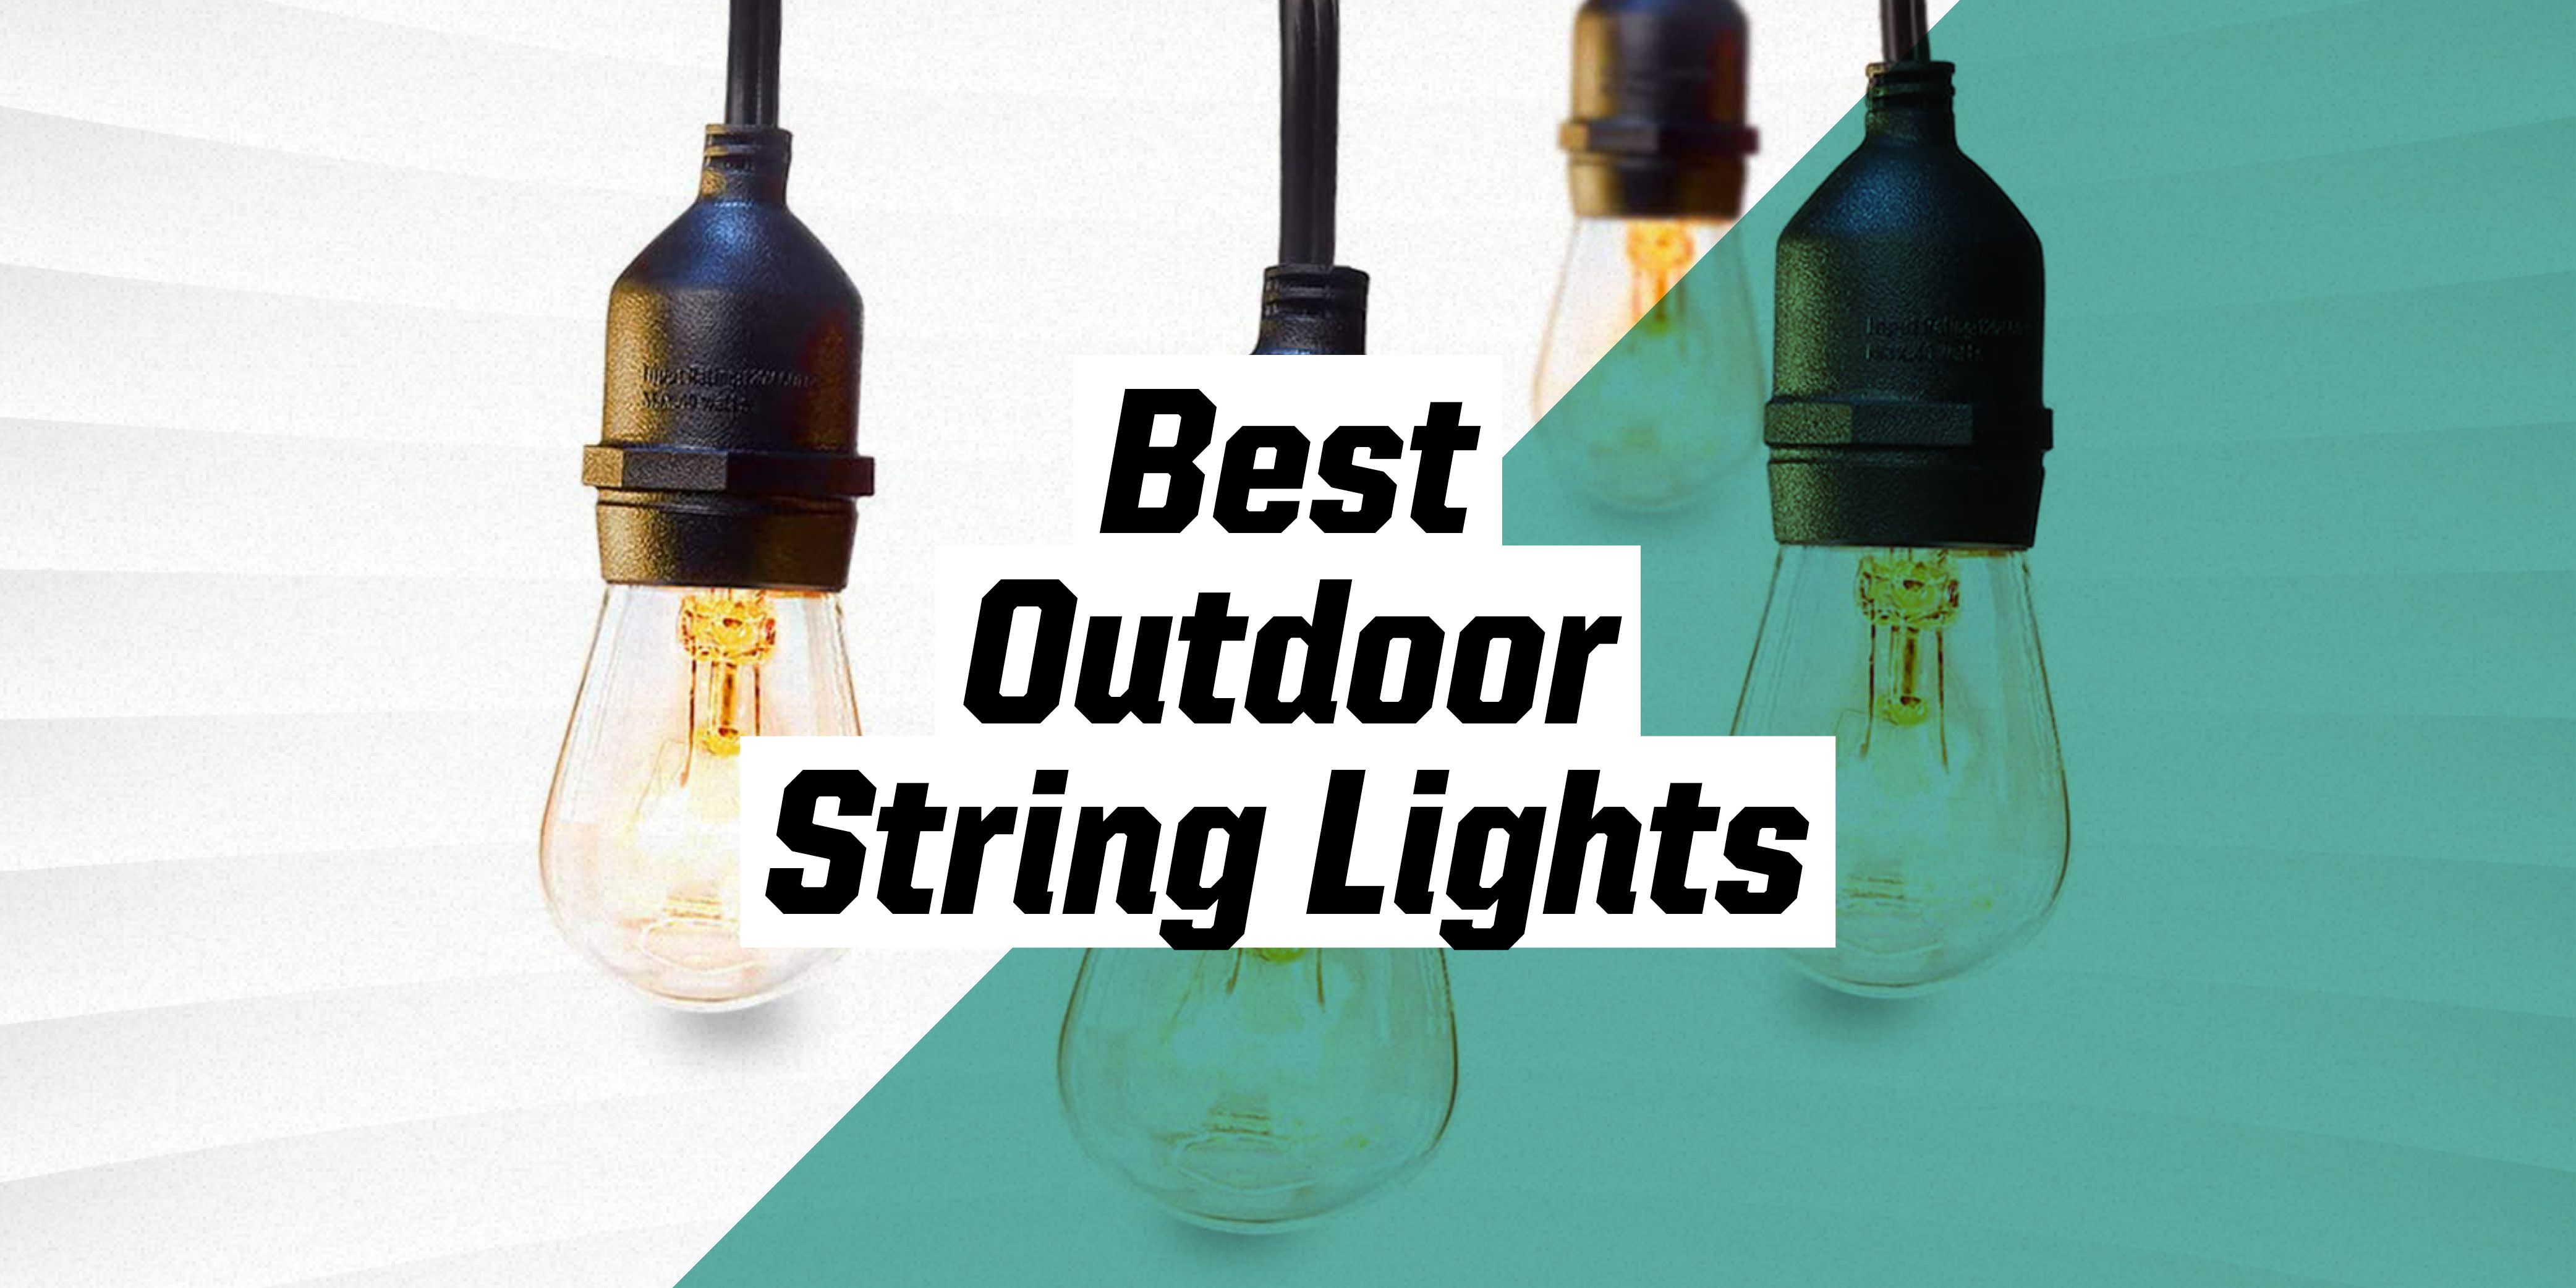 The 10 Best Outdoor String Lights 2021, Low Voltage Led Patio String Lights